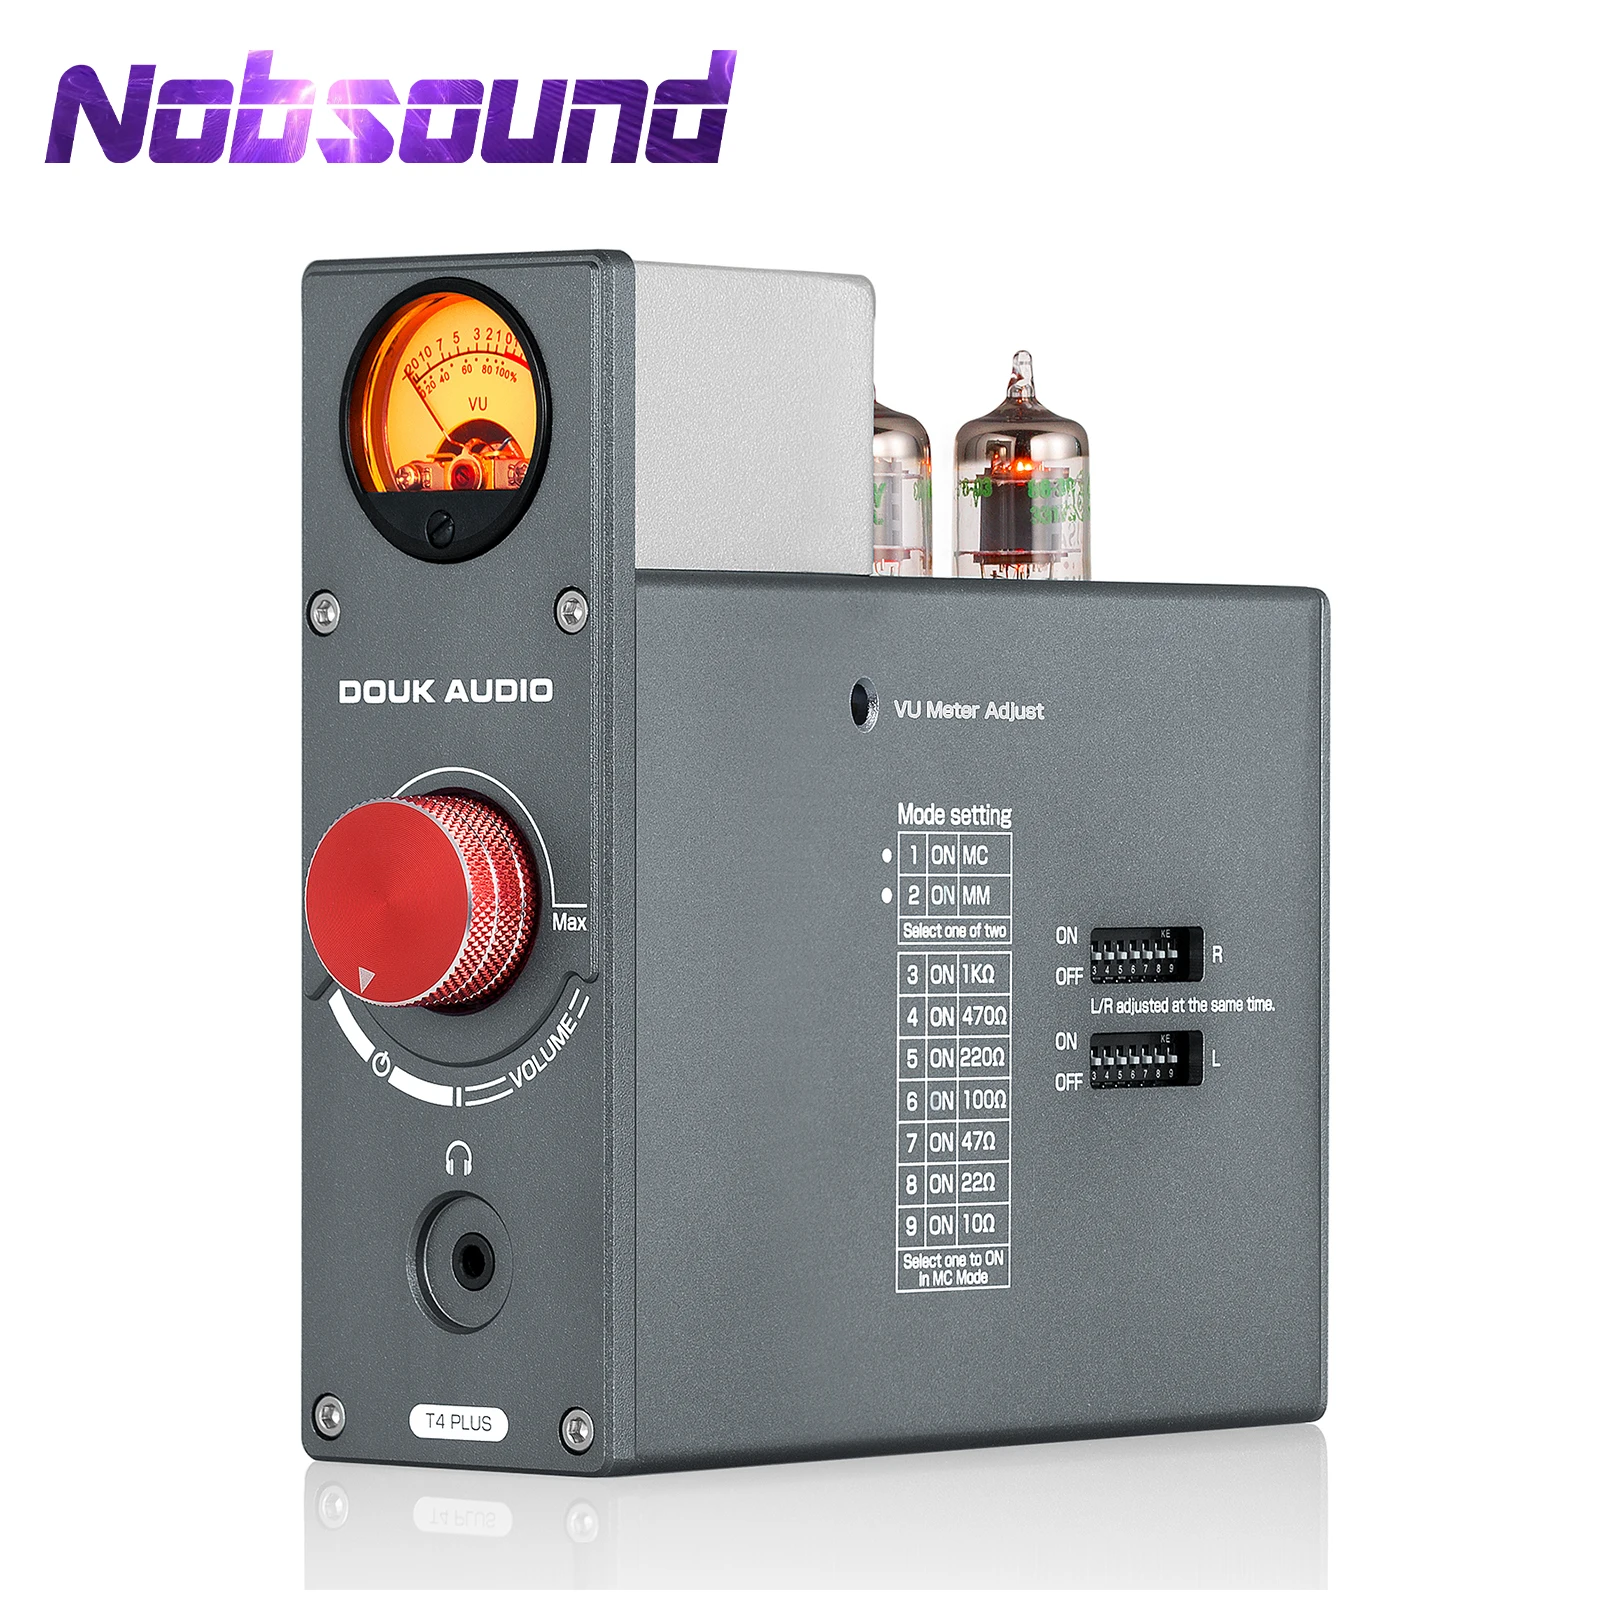 Nobsound 5654 Valve Tube Phono Stage Preamp Stereo Audio Preamp for TV/MP3/Phone Headphone Amp w/VU Meter